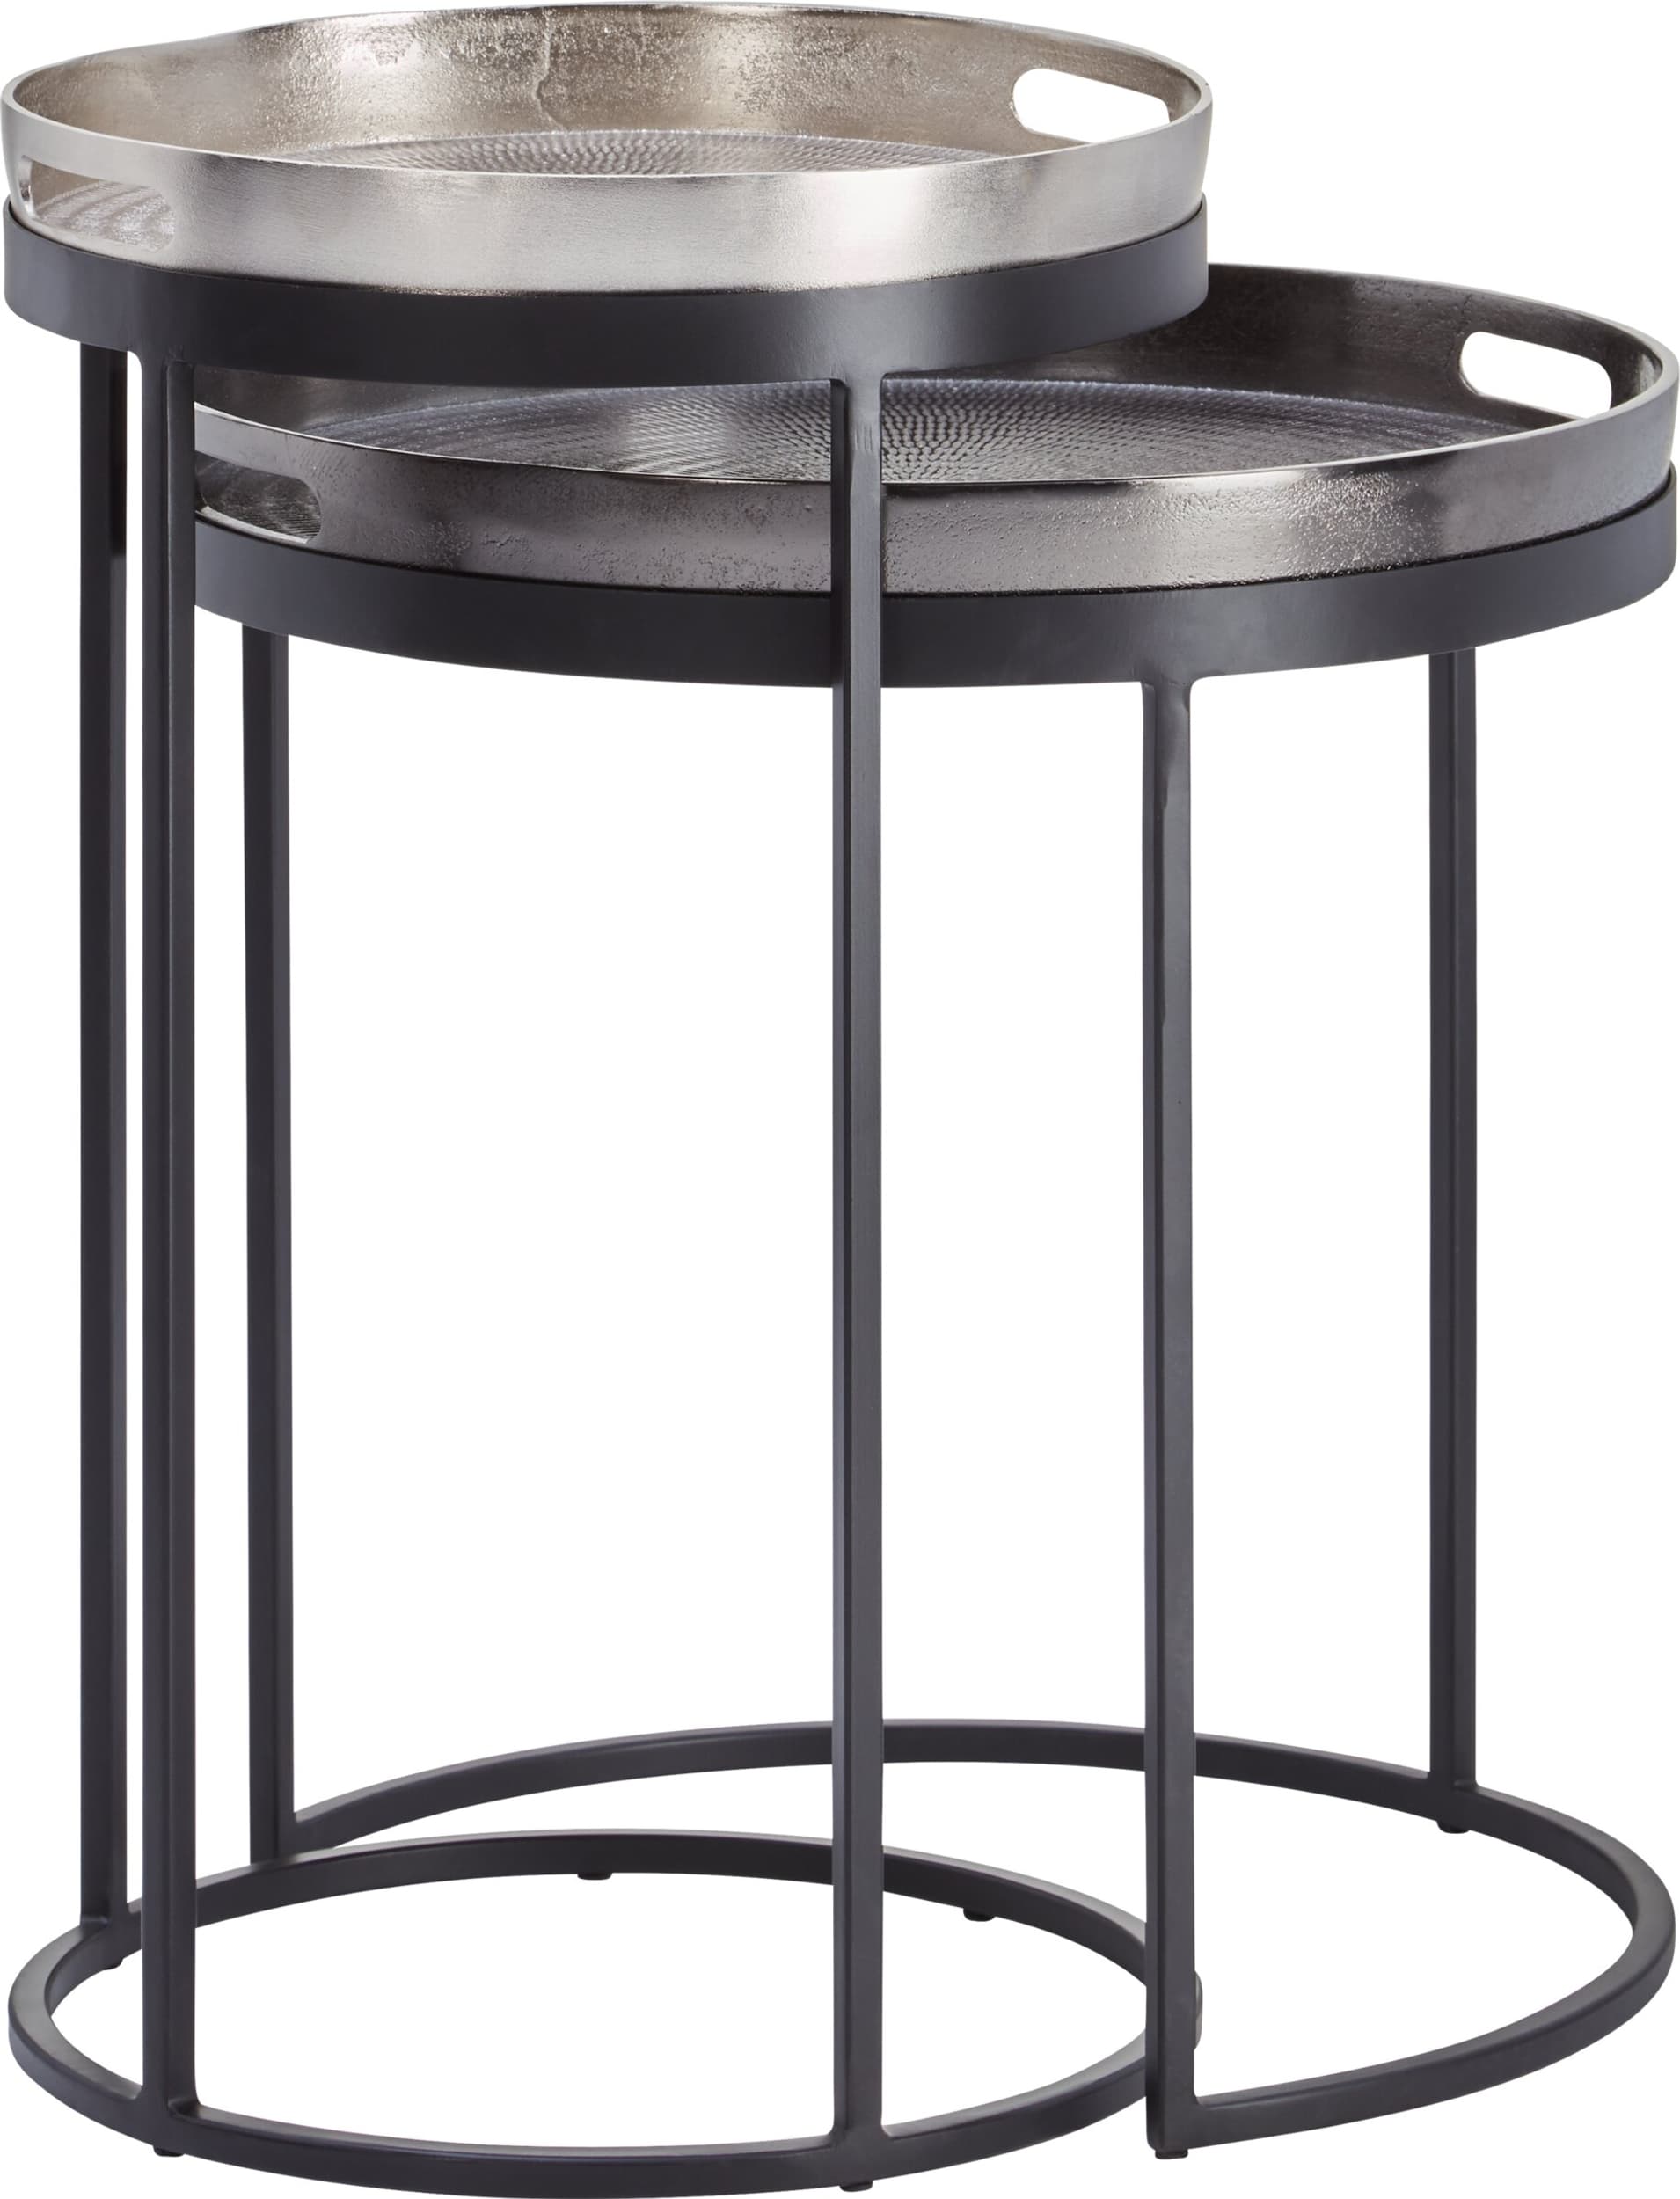 ADDISON Table d'appoint, Micasa